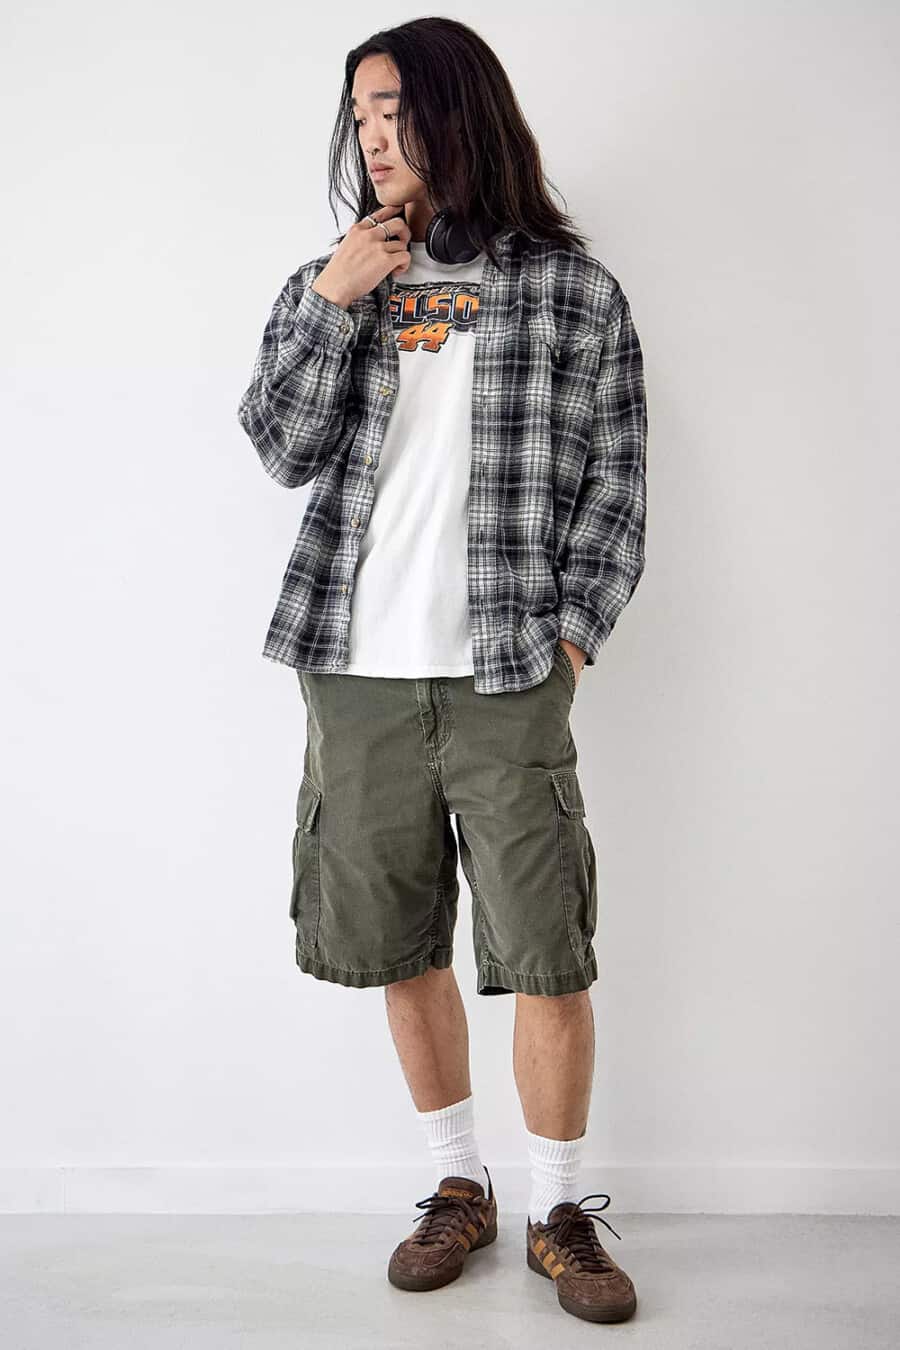 Men's baggy green cargo shorts, white print T-shirt, black/white flannel shirt, white socks and brown Adidas sneakers grunge outfit